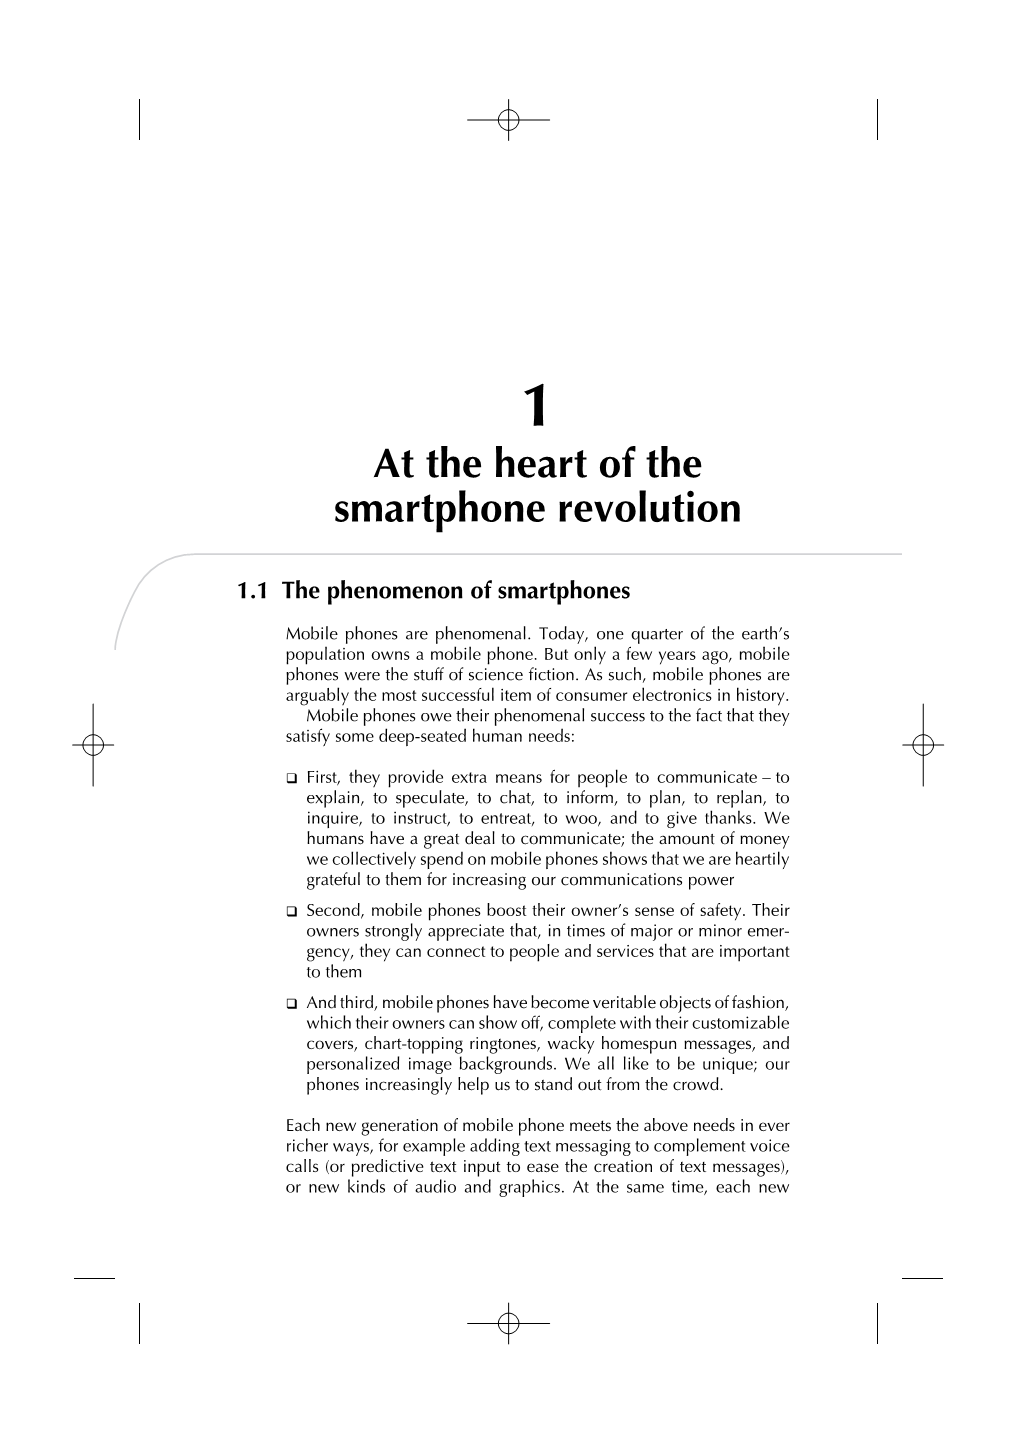 At the Heart of the Smartphone Revolution